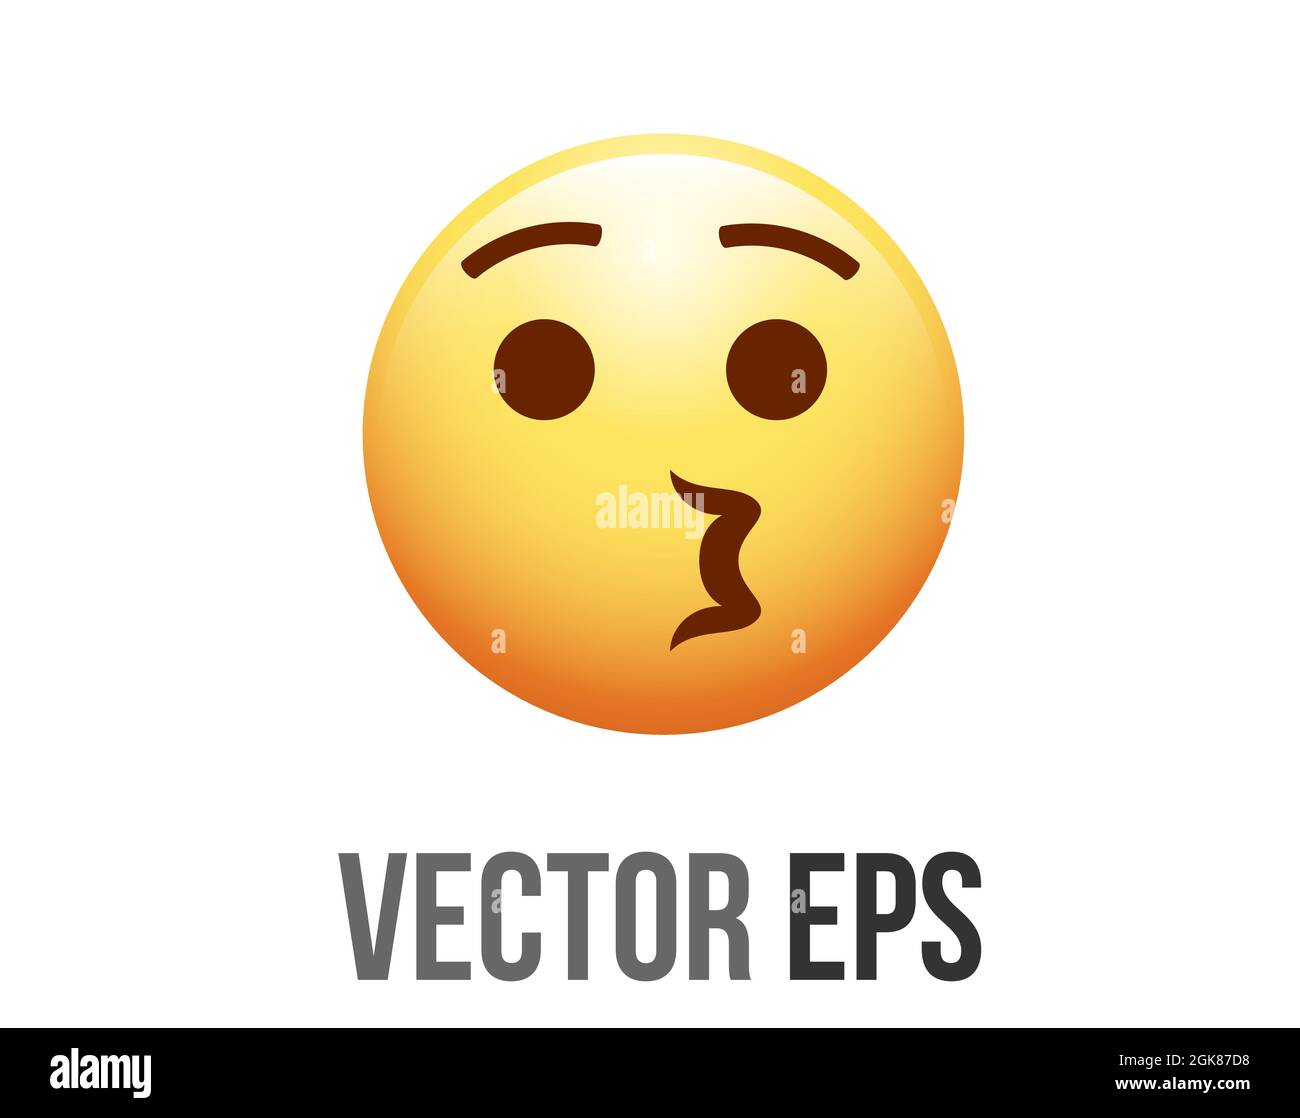 The isolated vector gradient yellow face icon with simple, open eyes and puckered lips giving a kiss, commonly conveys sentiments of love and affectio Stock Vector